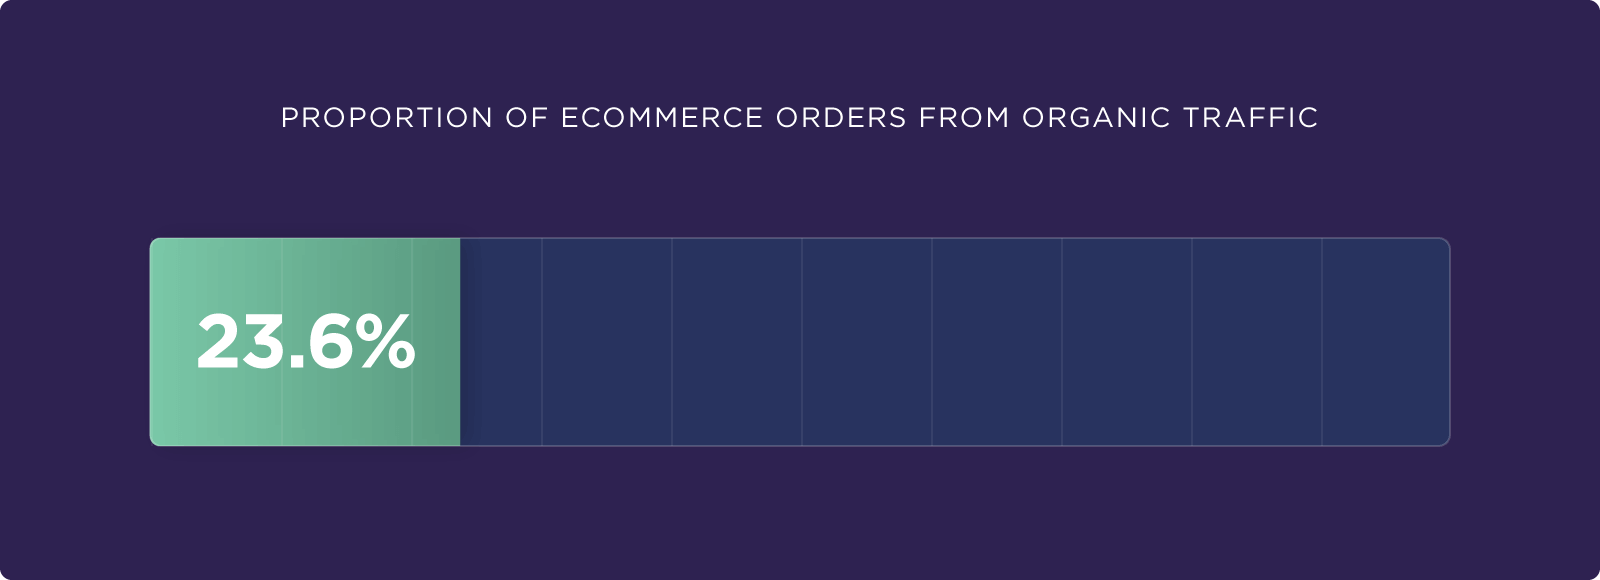 Proportion of ecommerce orders from organic traffic